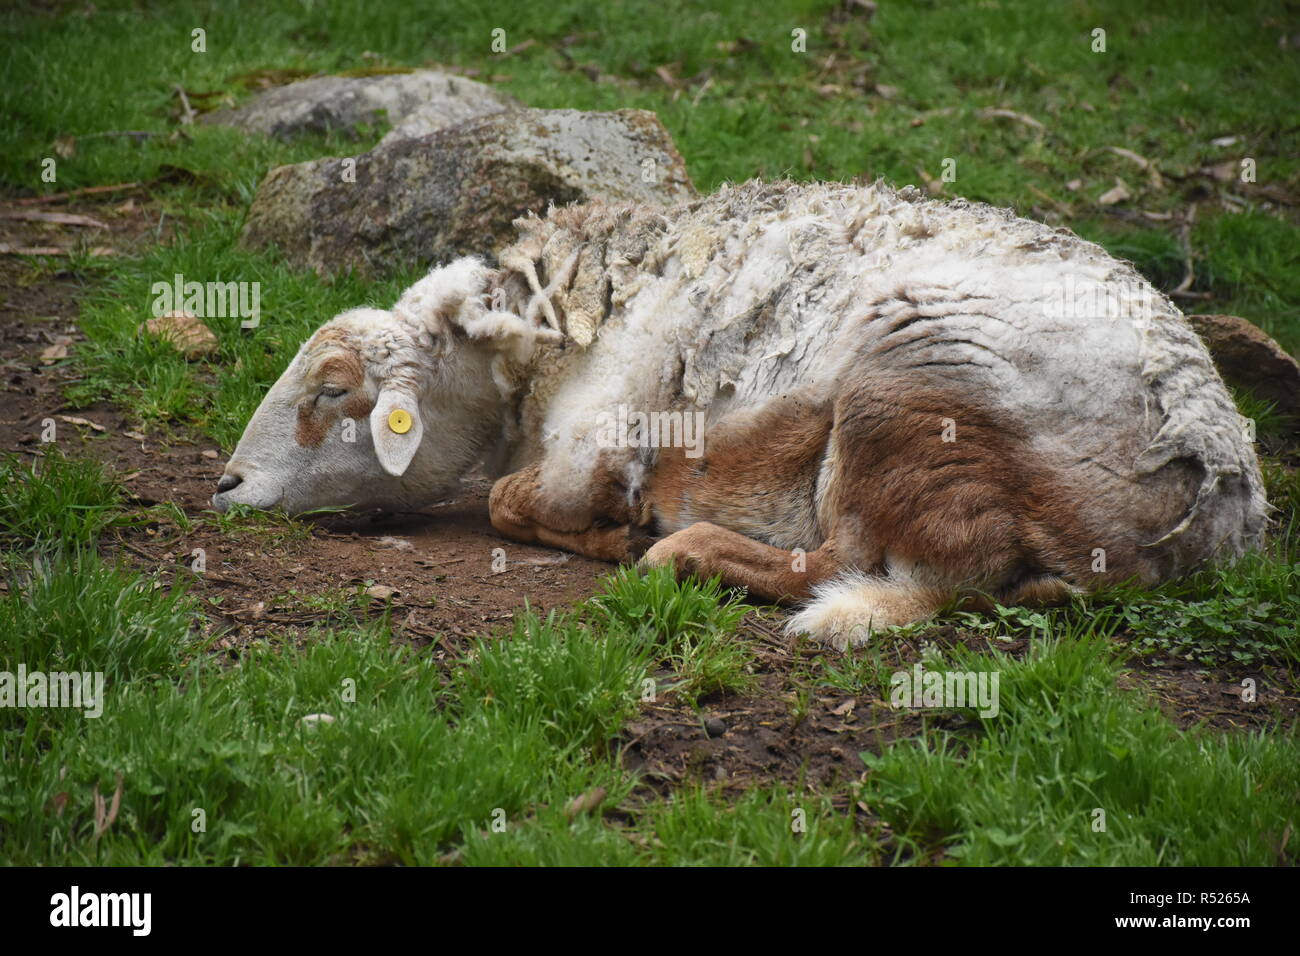 Old Sheep sleeping on grass in a farm Stock Photo